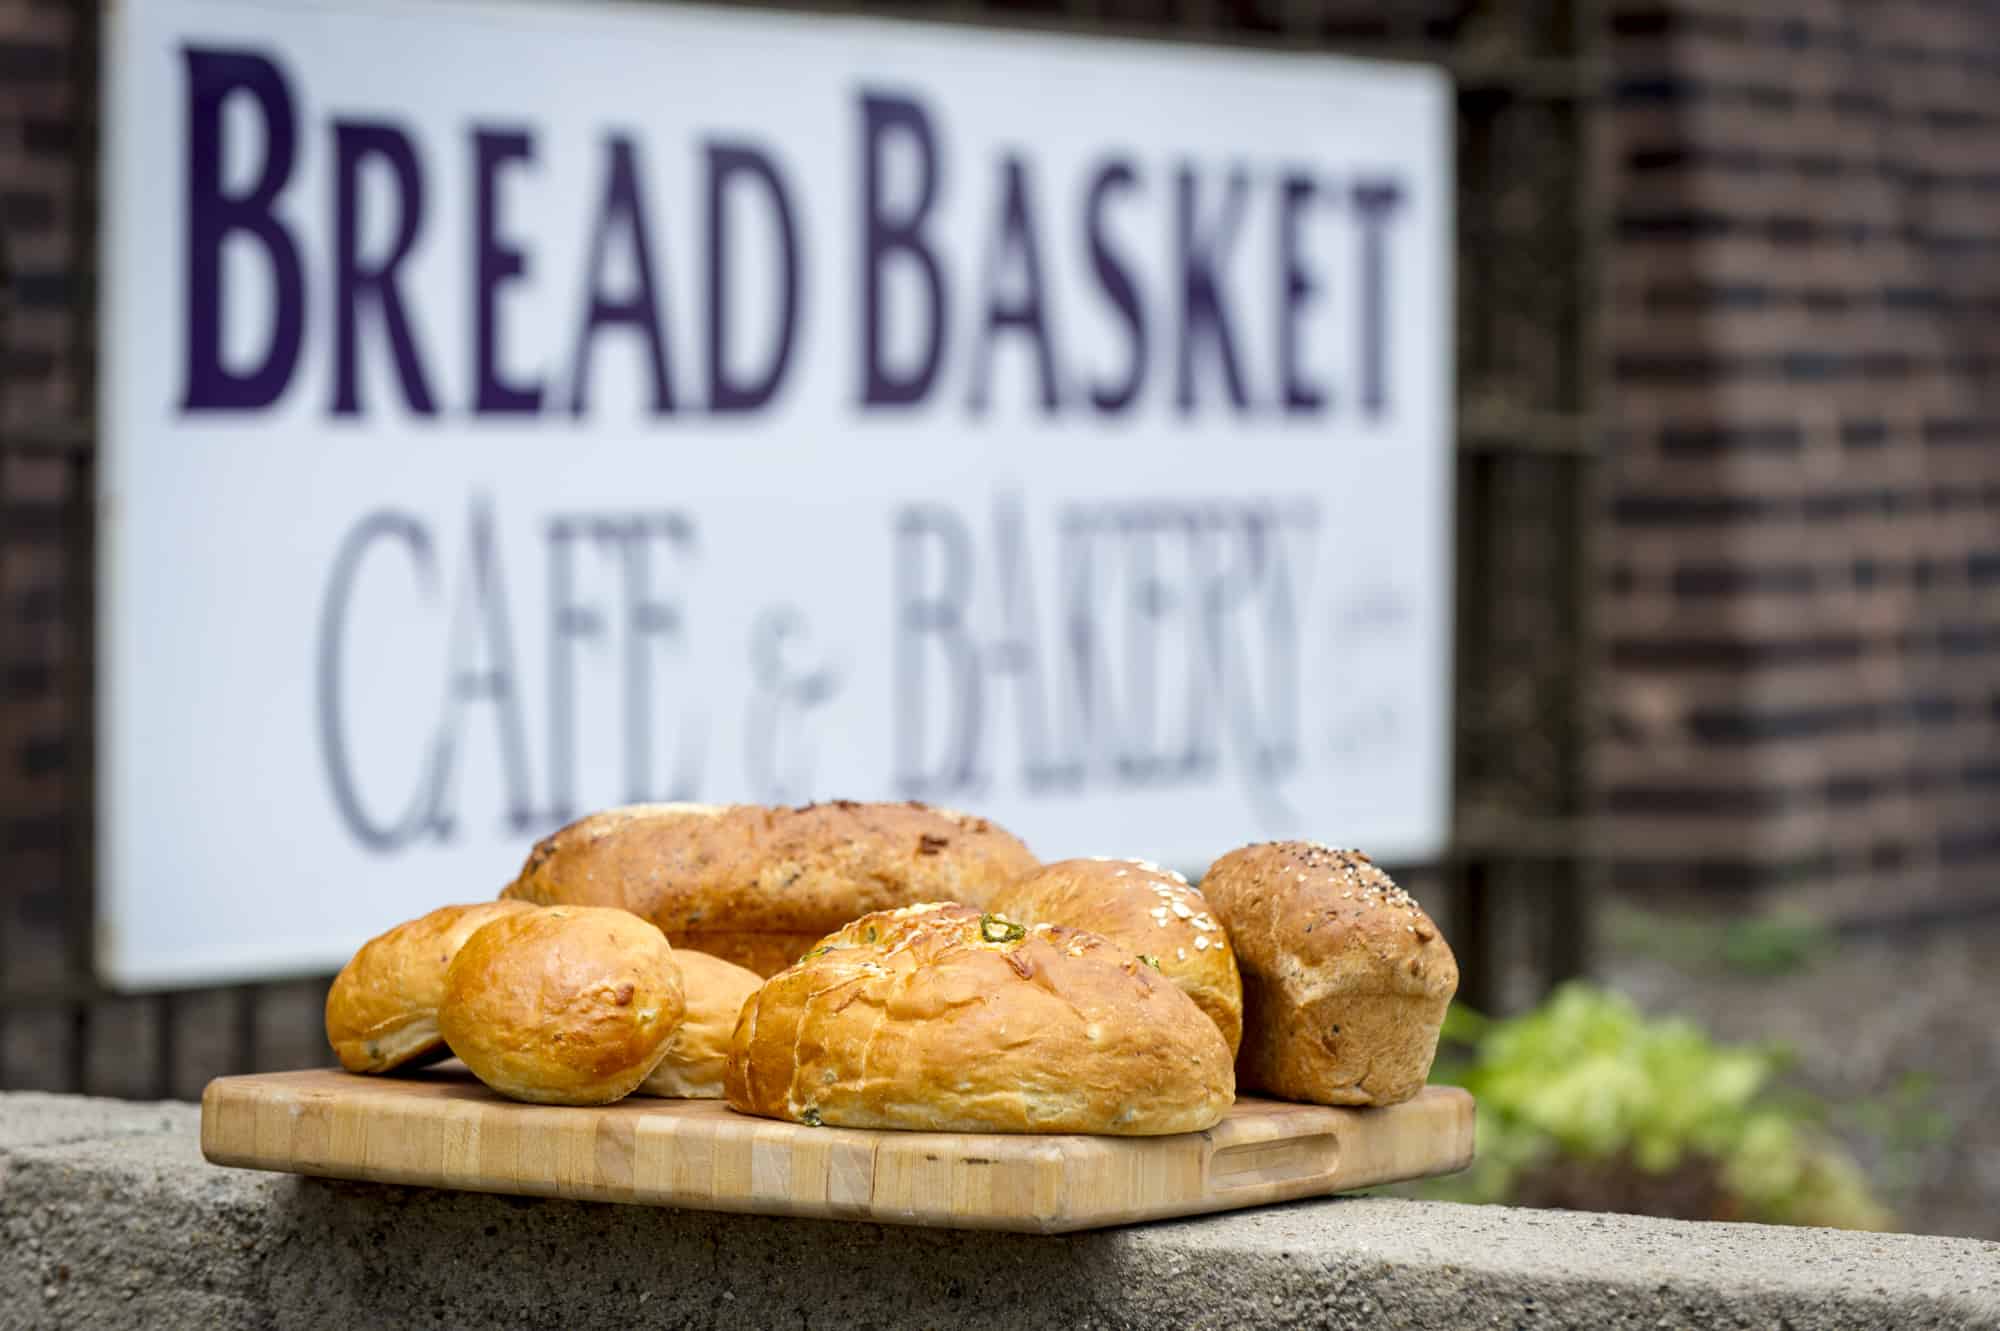 Unique things to do in Hendricks County IN - Bread Basket Cafe